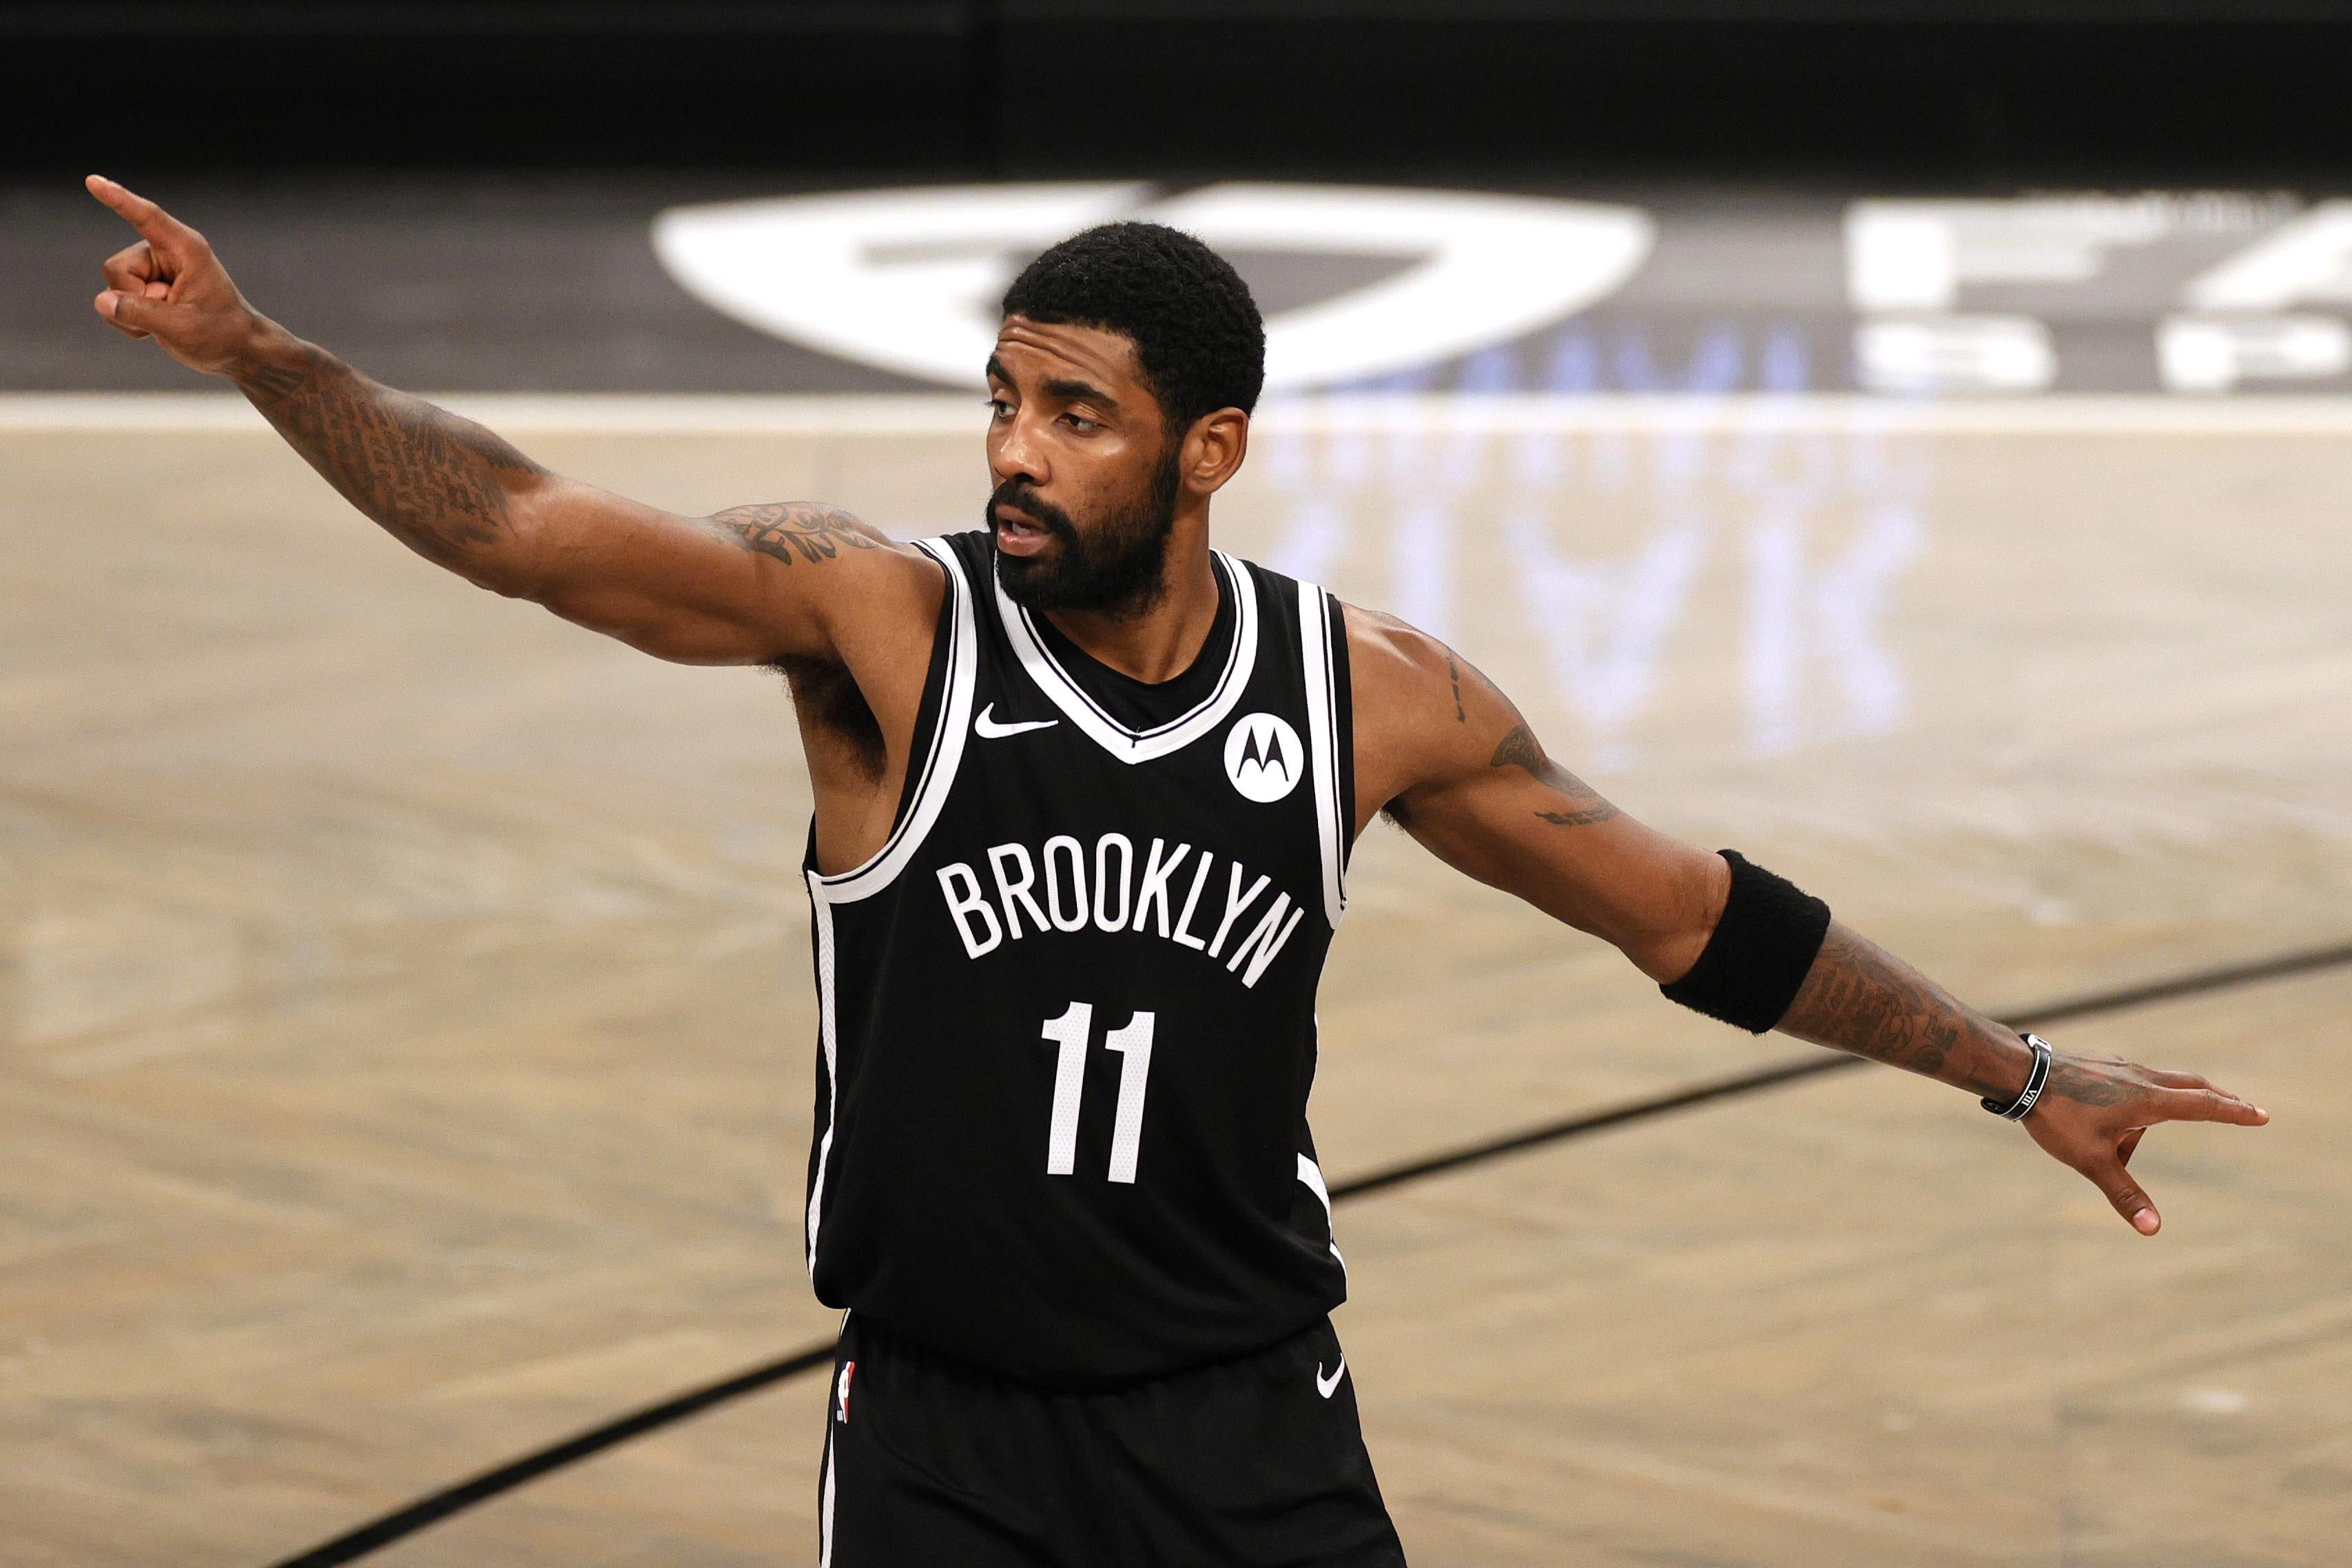 Kyrie Irving of the Brooklyn Nets points during an NBA game.